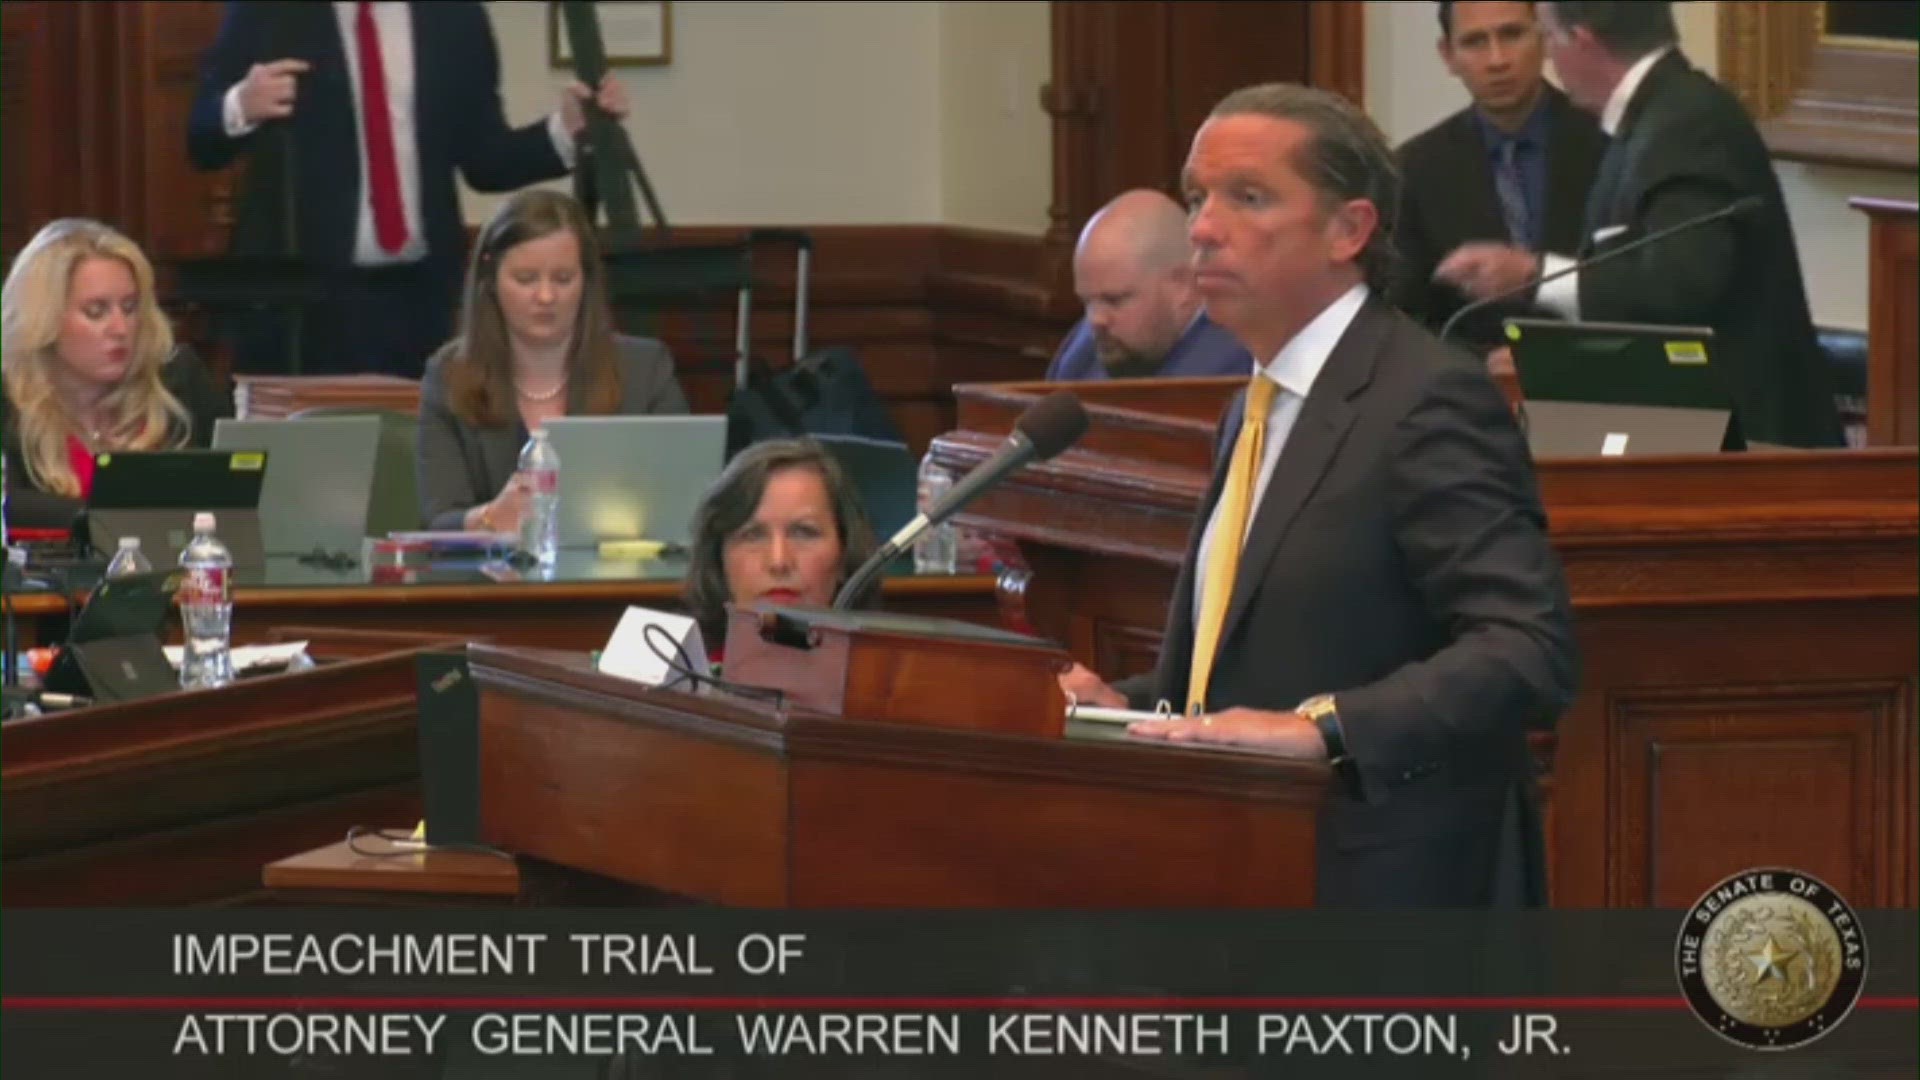 High-profile attorneys Tony Buzbee and Dan Cogdell delivered the opening statement in defense of Texas Attorney General Ken Paxton.